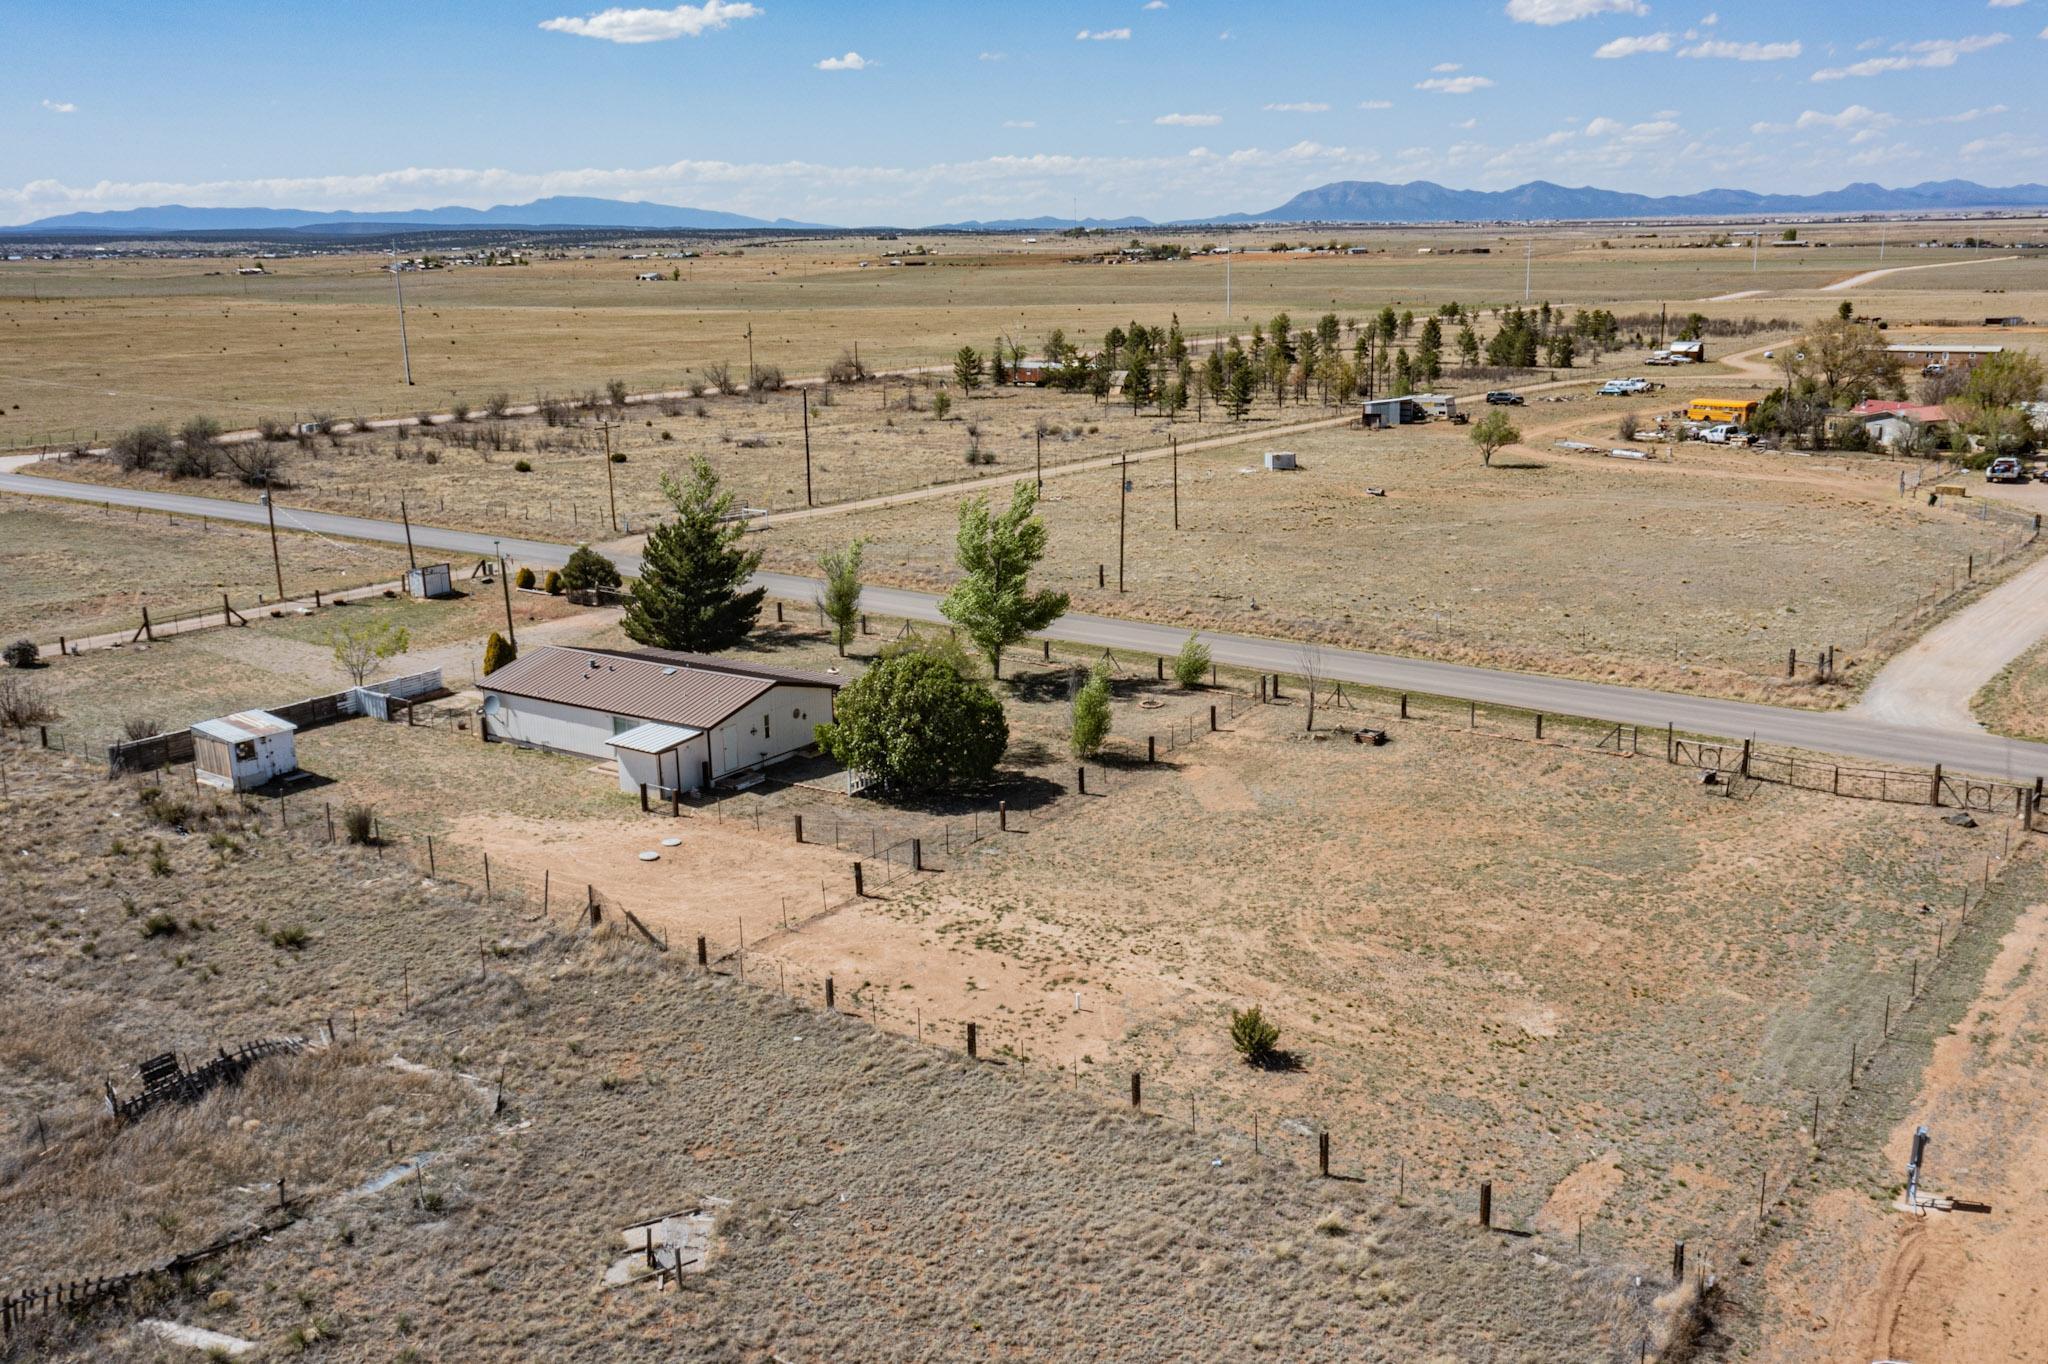 Welcome to this Move-in Ready, Single-Level, Quiet, Country Retreat in Moriarty, NM! Nestled on a Large, 1.25-Acre Lot, 2 Carl Lane features a Recent Septic System + Private Well Drilled in 2023! Brand-New Stainless Steel Refrigerator + Gas Range! Open Kitchen w/ Bar-seating Area, Breakfast Nook, Sliding-Glass Door to Huge Backyard. New Carpet. Brand-New Washer & Dryer Included! Make an appointment to see this Home today!